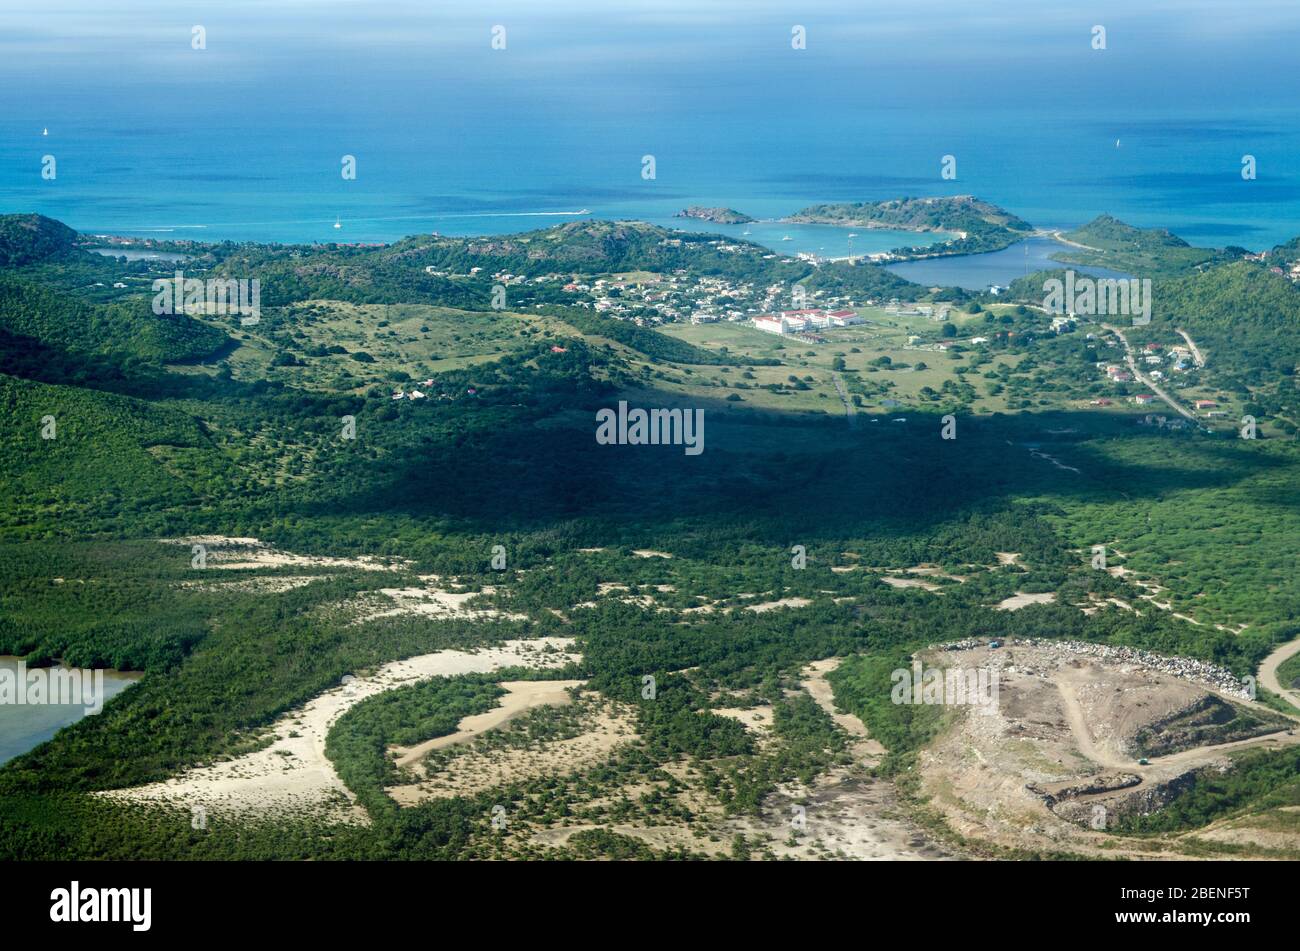 Aerial view of the Caribbean island of Antigua with the white buildings of the Antigua State College, Deep Bay Beach, Fort Barrington National Park an Stock Photo